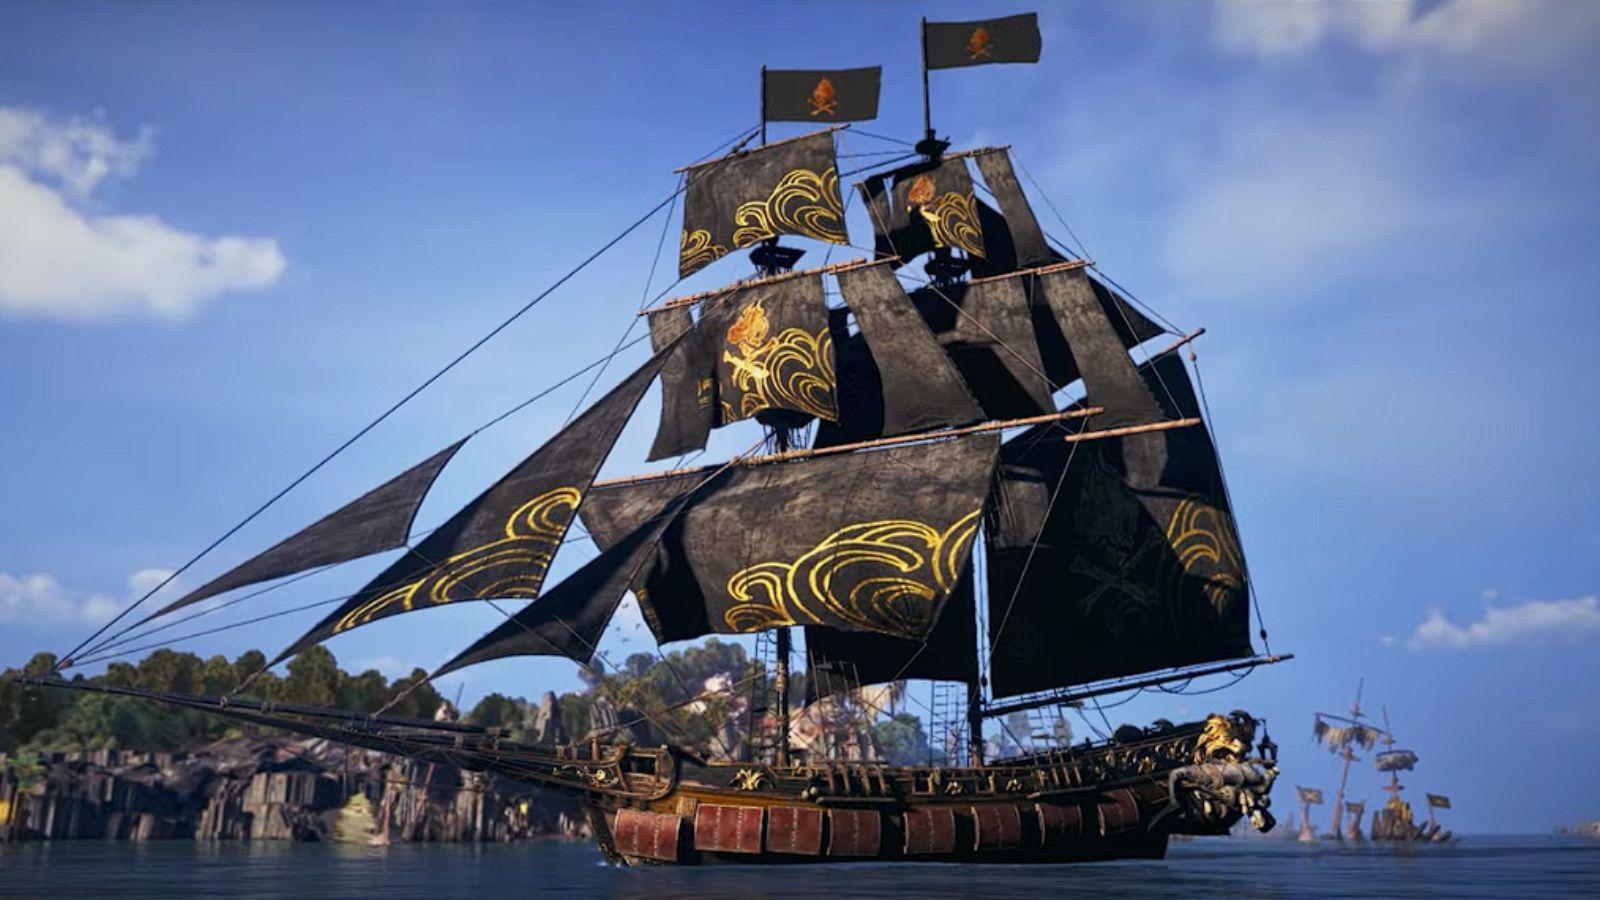 Skull & Bones Release Date, Trailer, And Gameplay - What We Know So Far